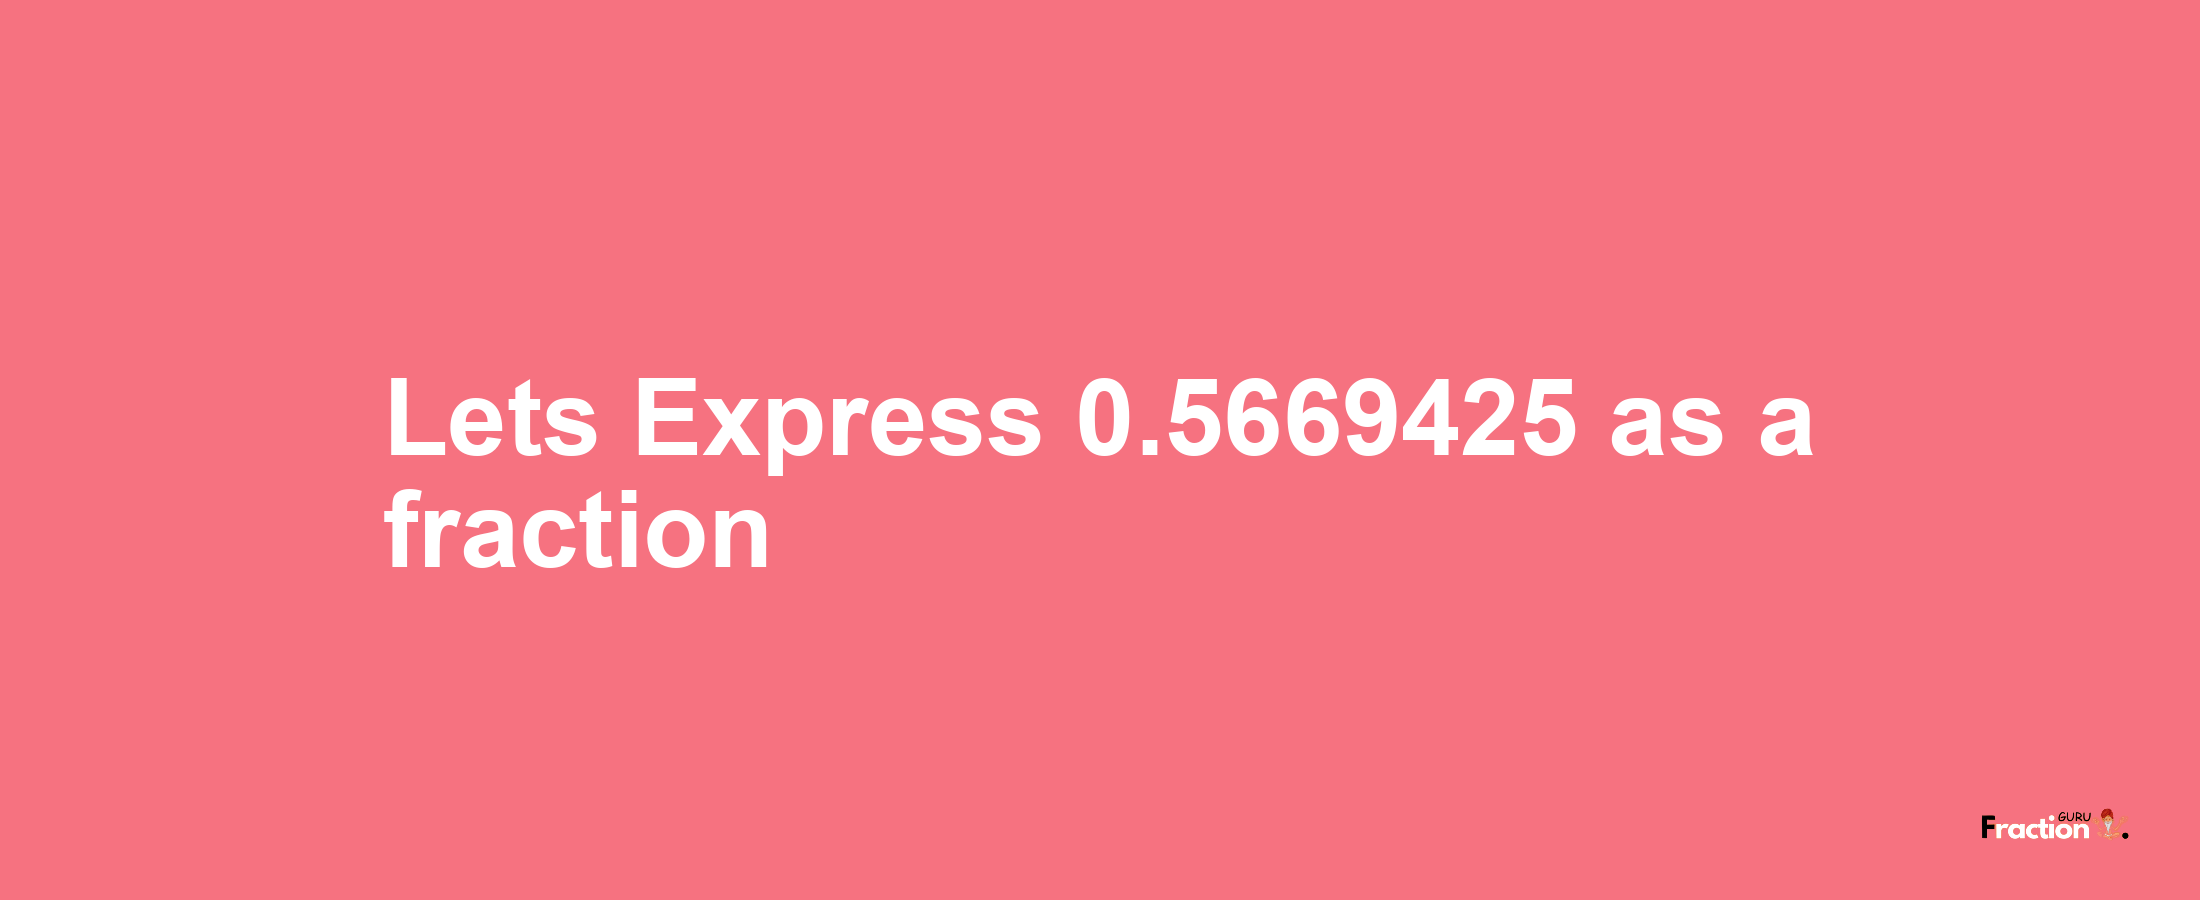 Lets Express 0.5669425 as afraction